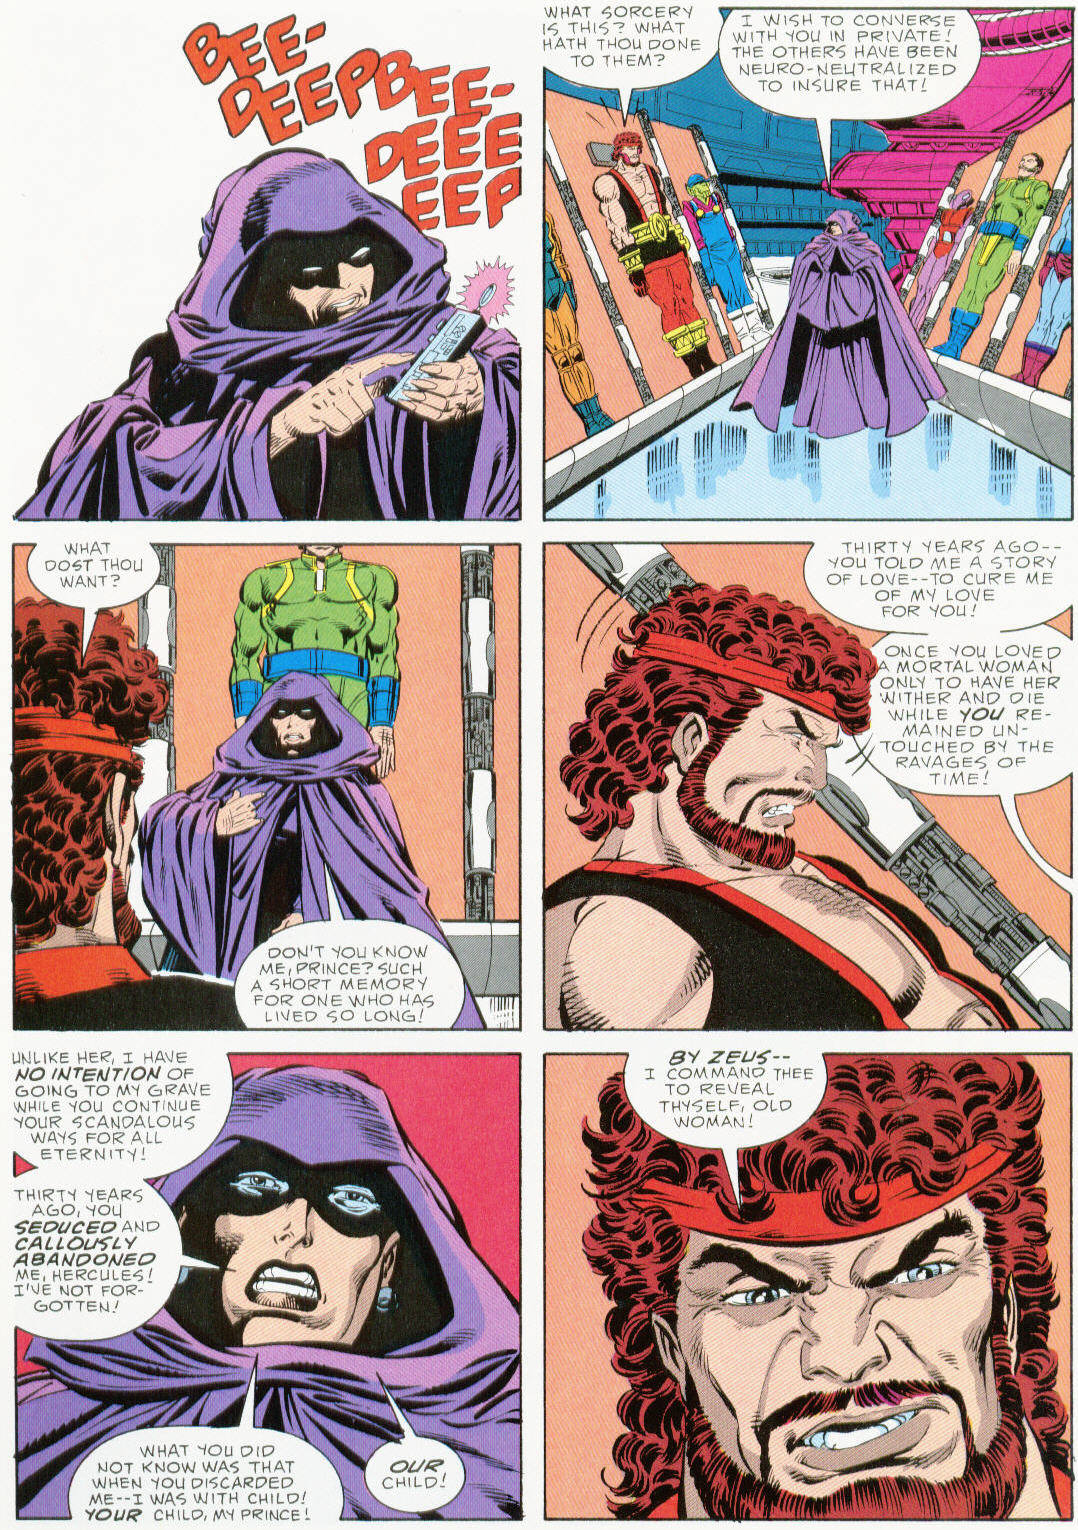 Marvel Graphic Novel issue 37 - Hercules Prince of Power - Full Circle - Page 40